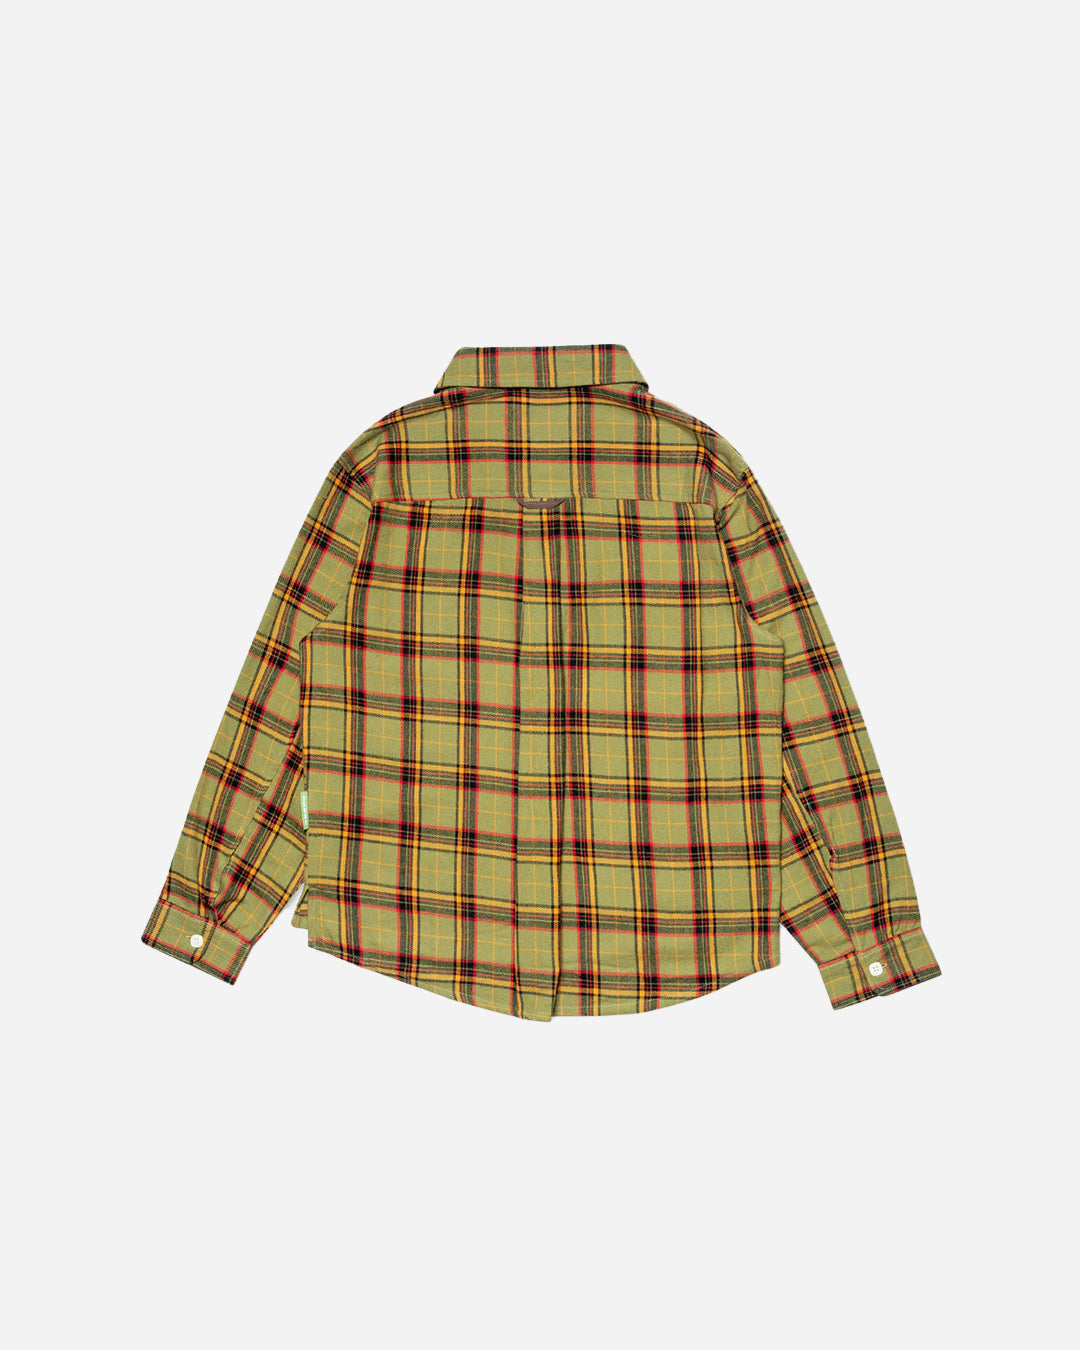 PHIL'S FLANNEL SHIRT